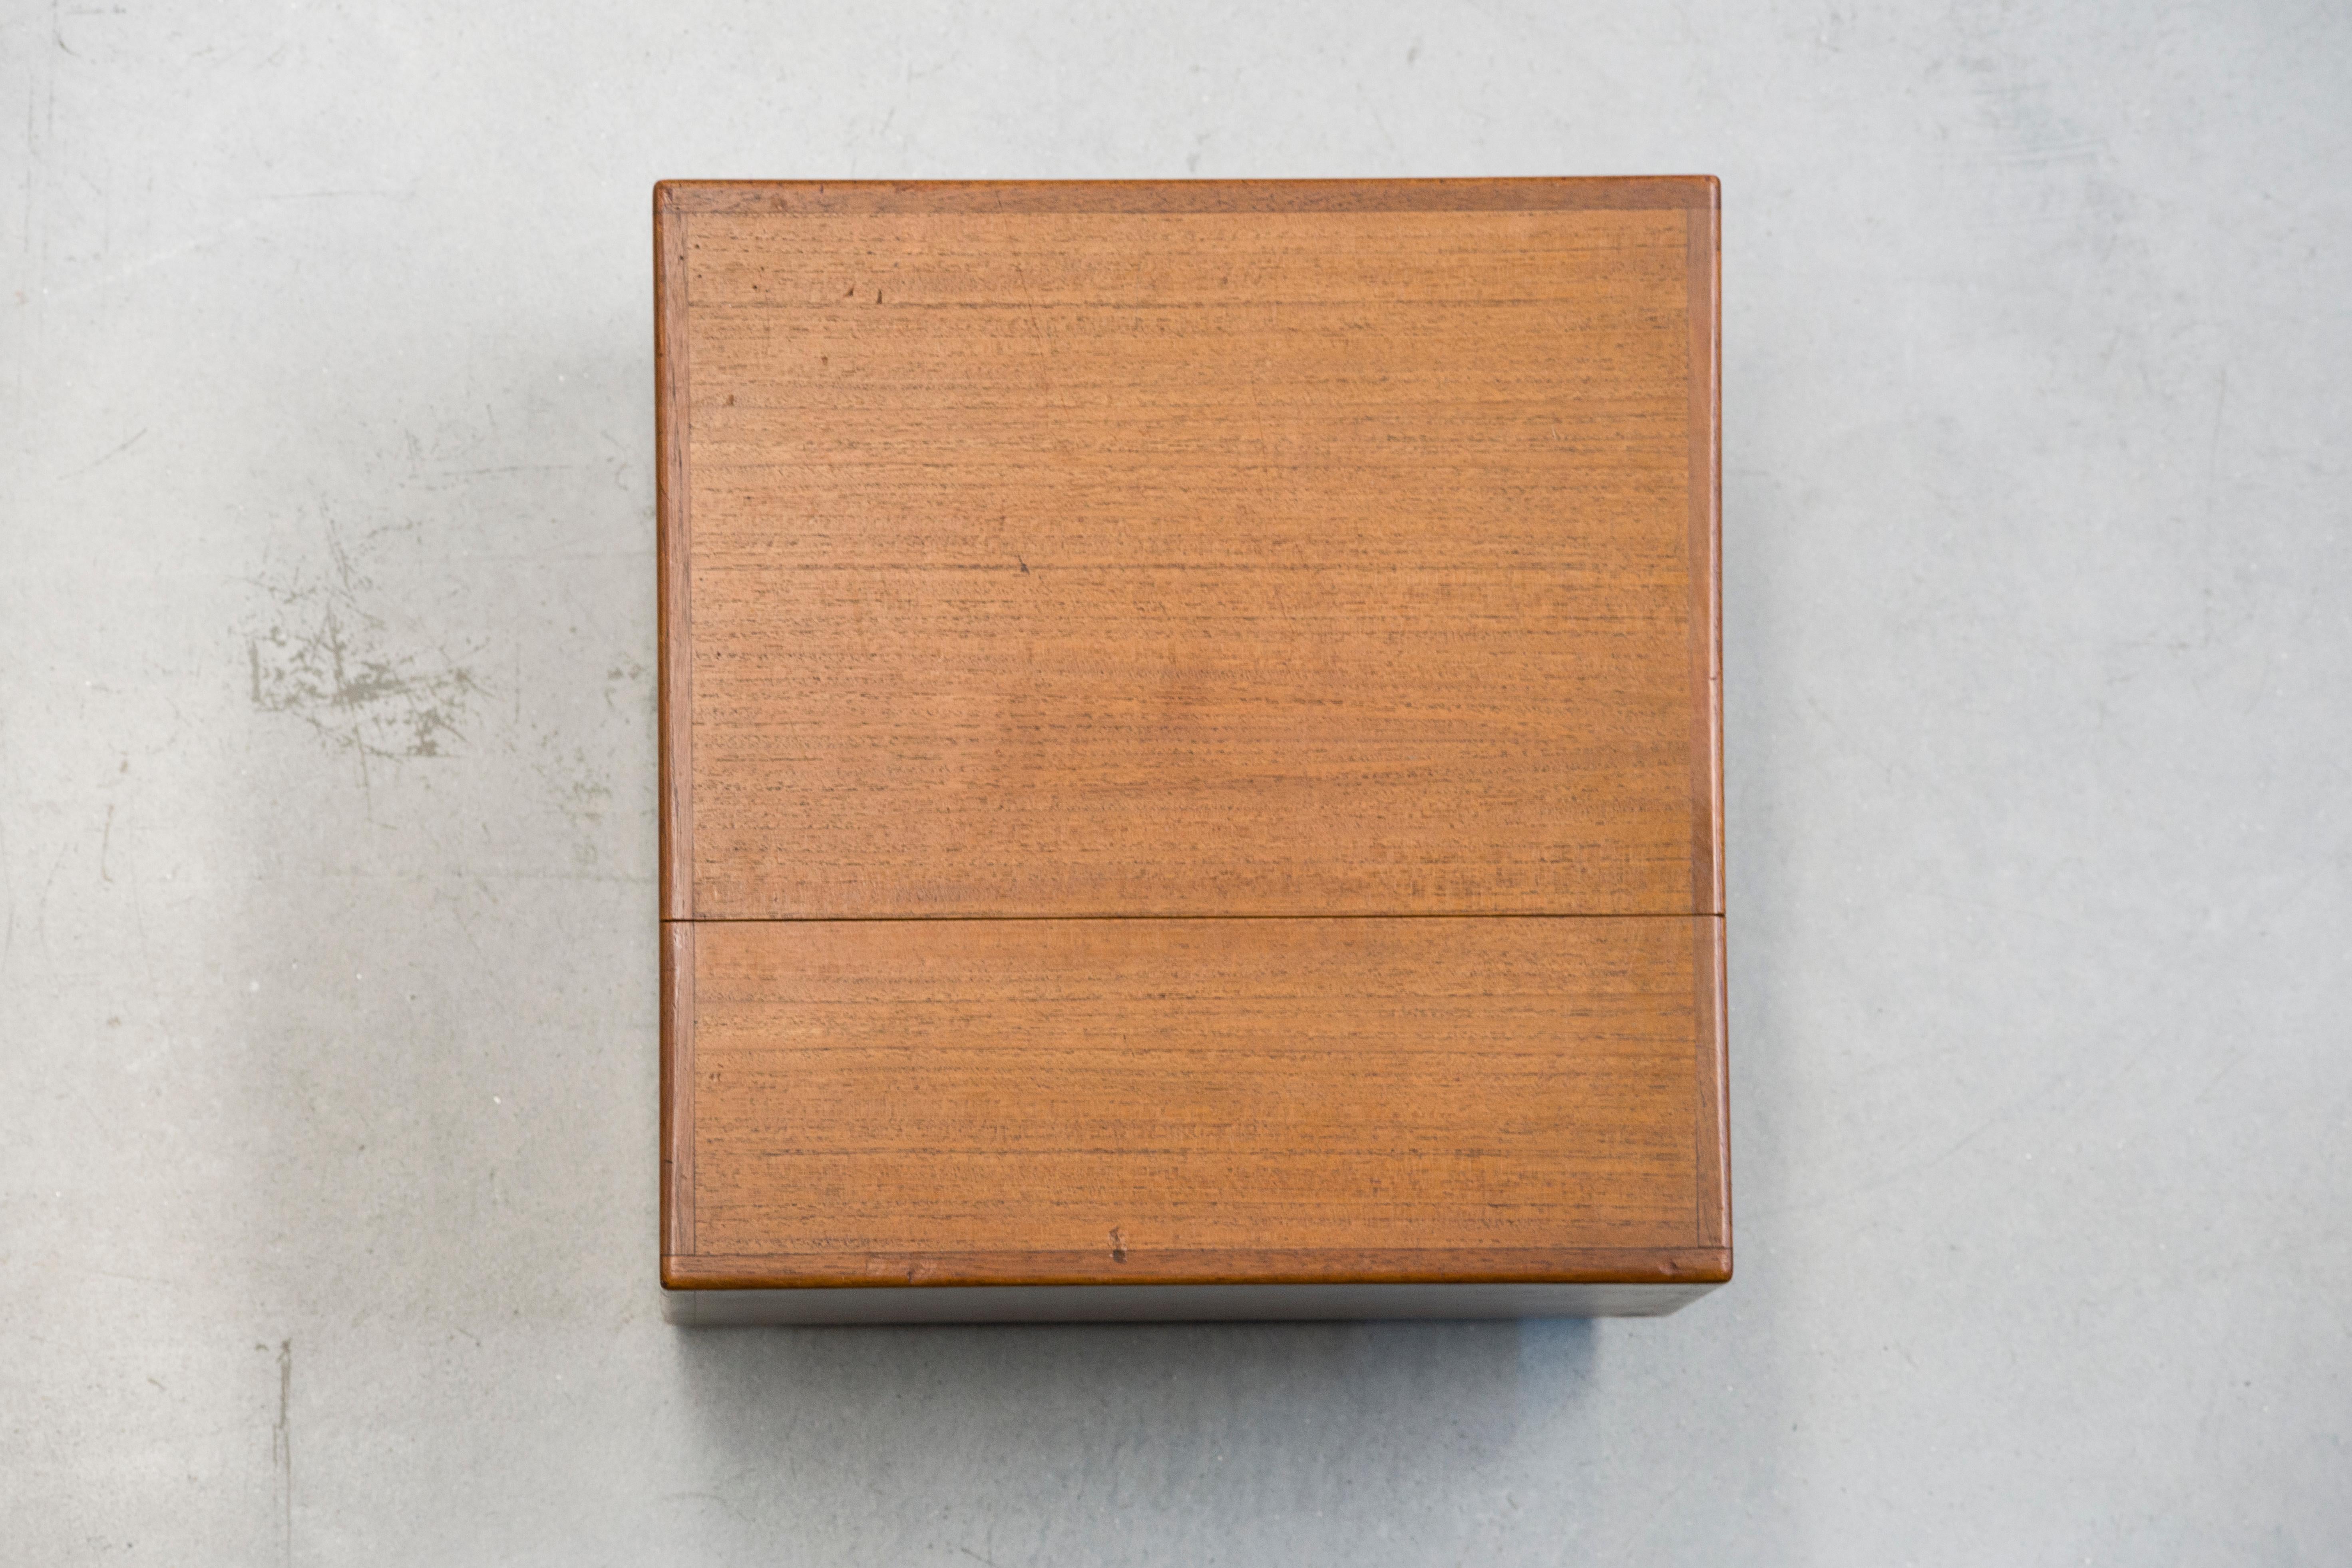 1956 Hans J. Wegner-Cabinet Mod. AT 34 wood manufactured by Andreas Tuck  For Sale 7